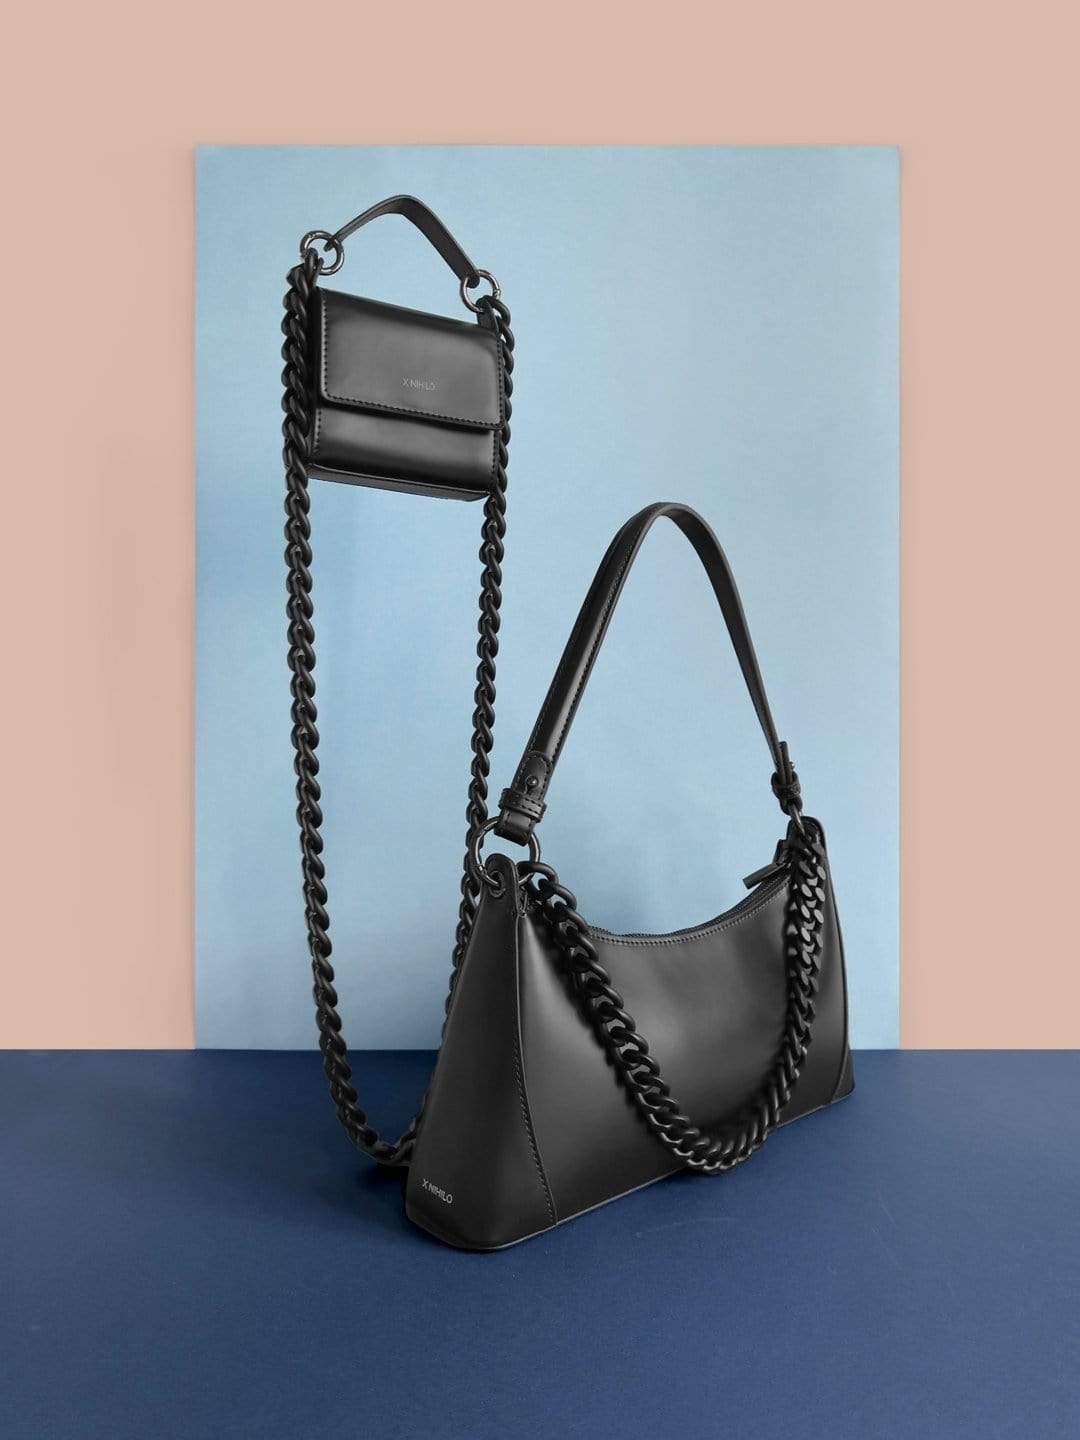 Black bags styled together